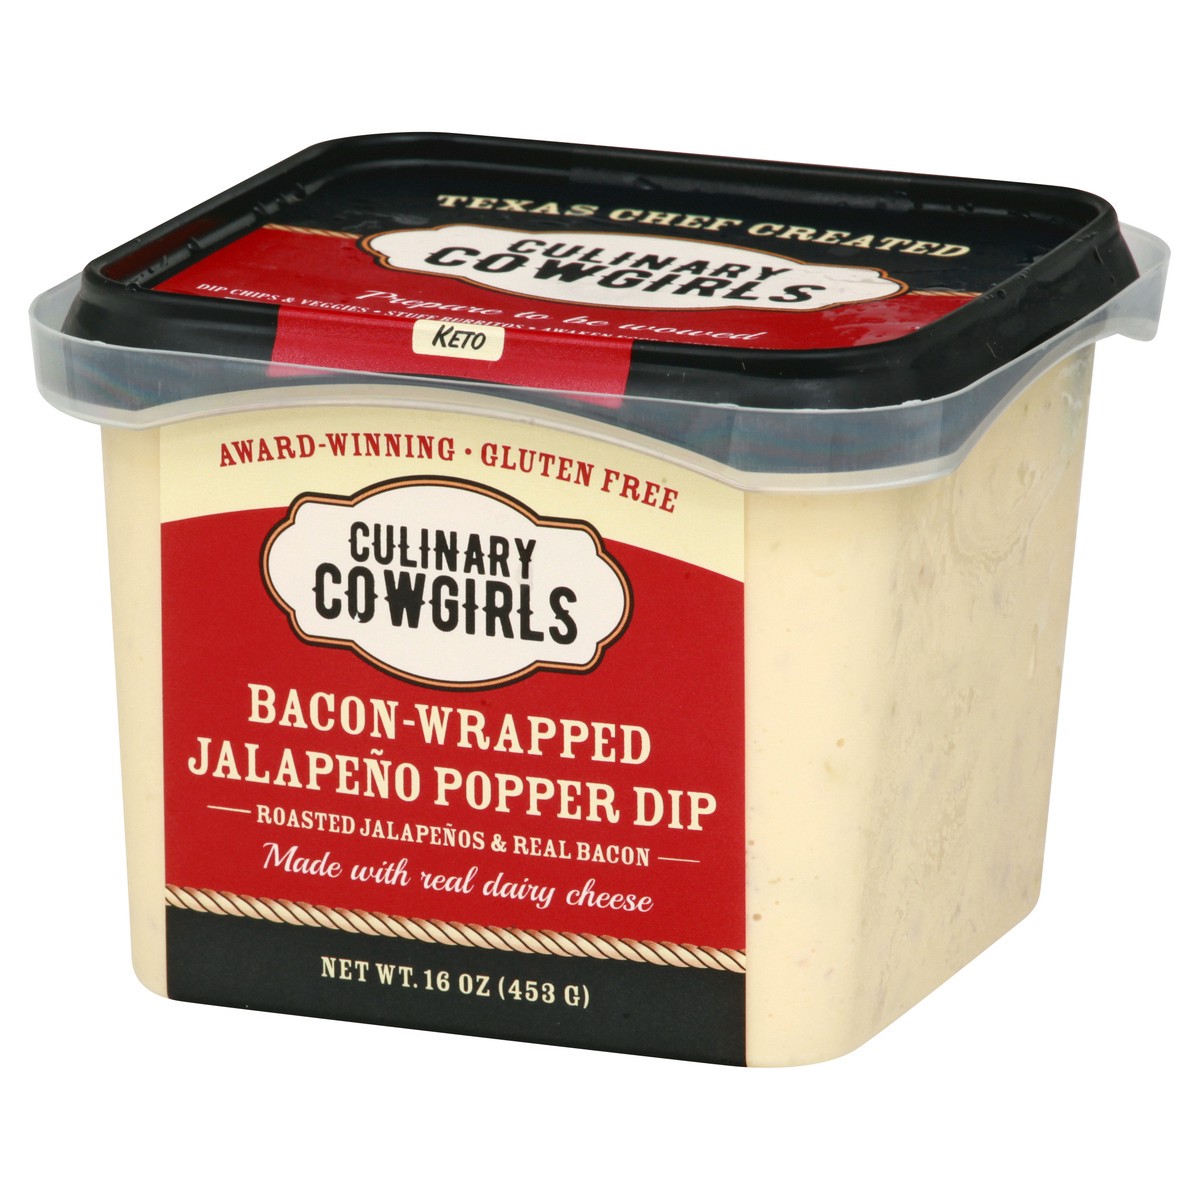 slide 10 of 13, Culinary Cowgirls Bacon-Wrapped Jalapeno Popper Dip 16 oz, 16 oz